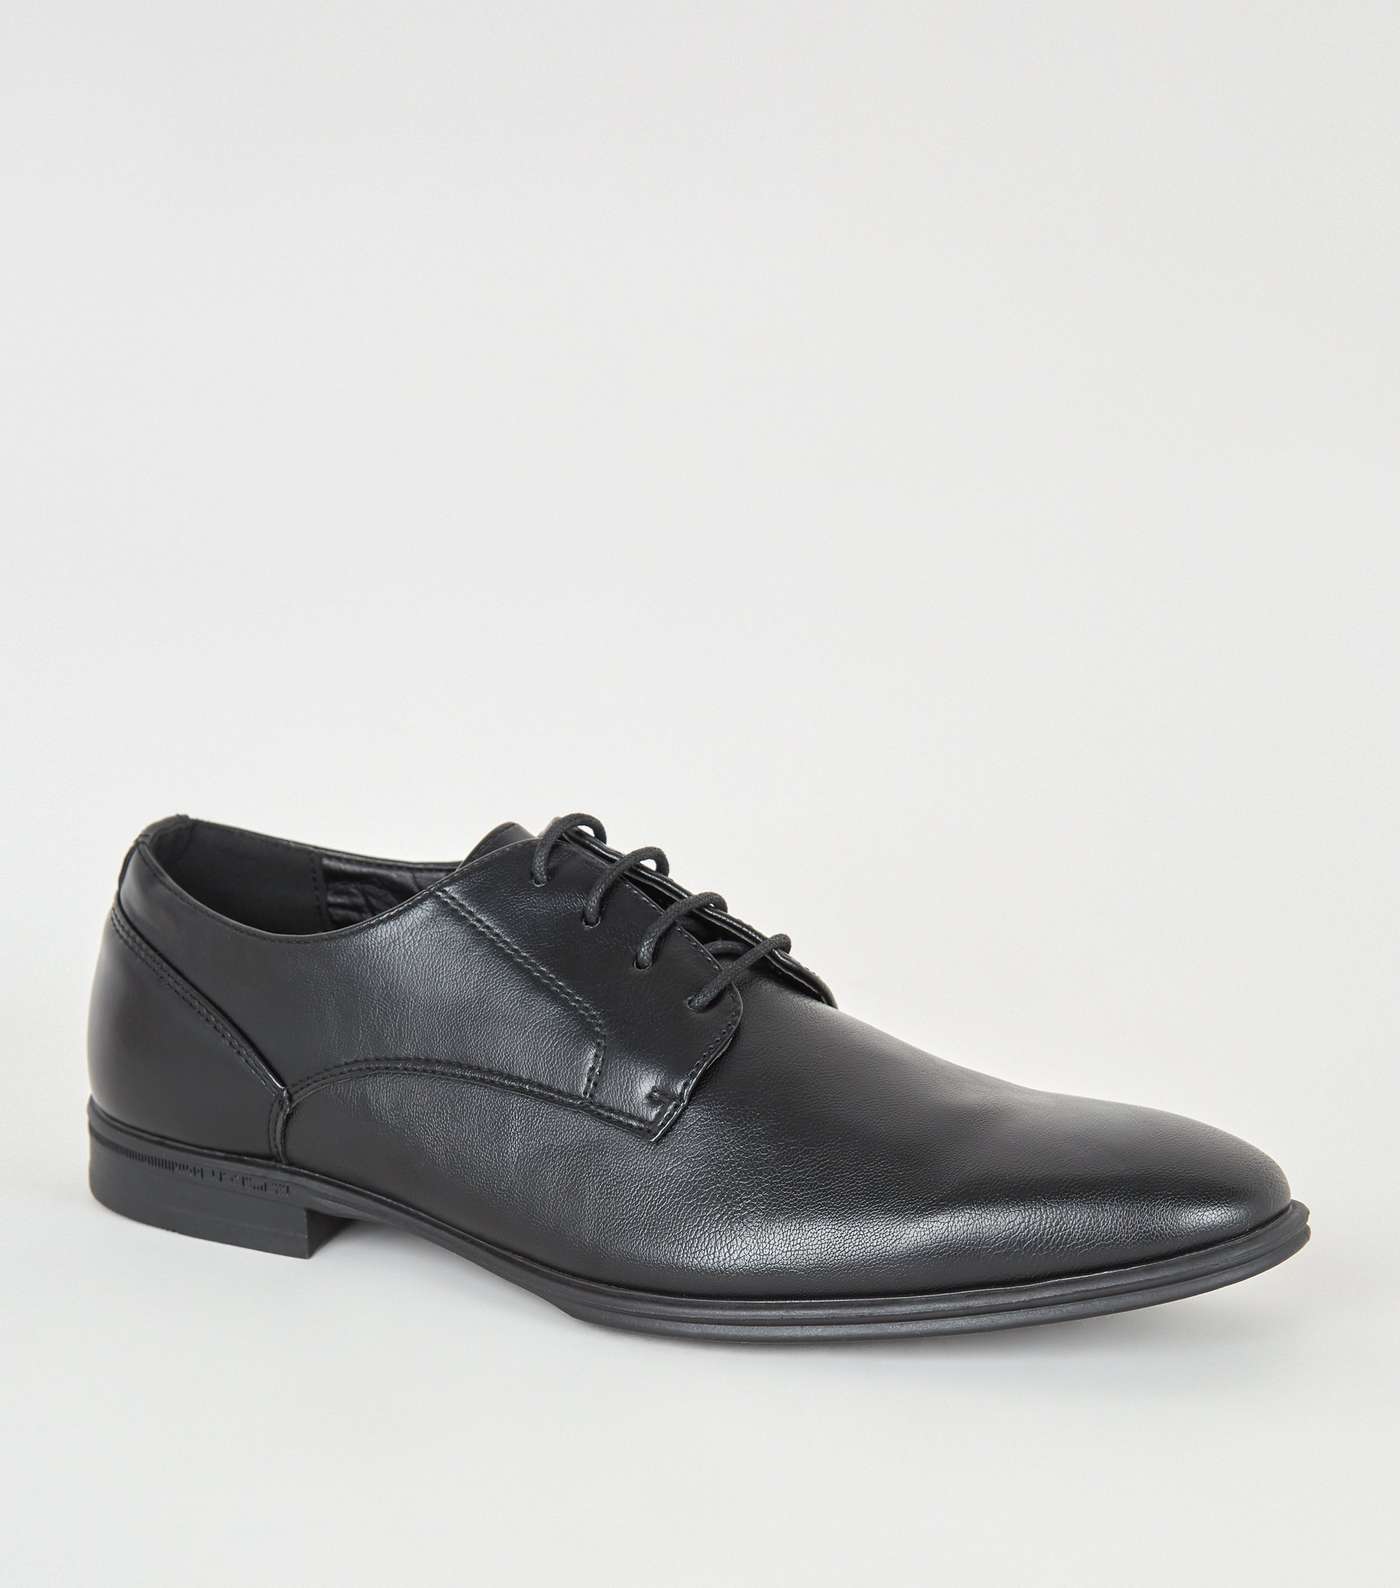 Black Leather-Look Formal Shoes